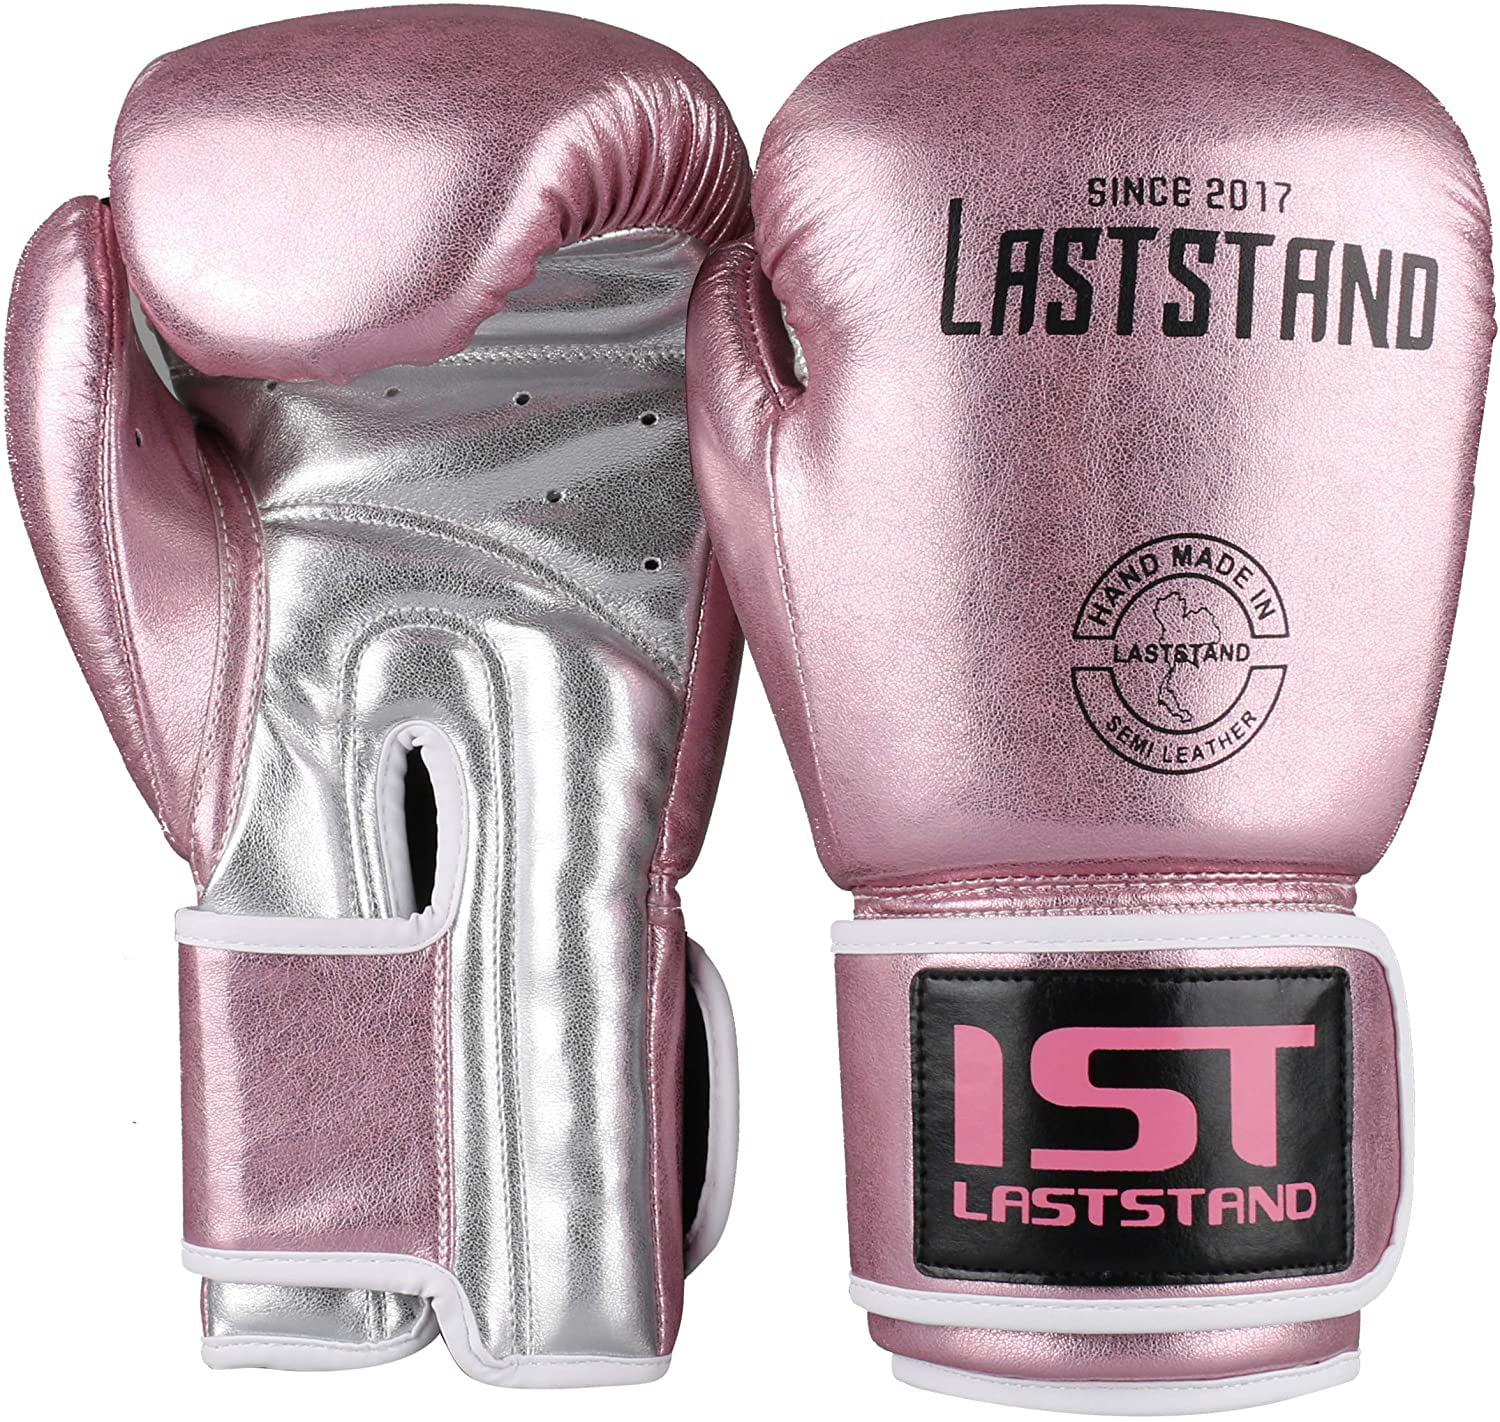 Shiny Punch Bag Martial Arts Sparring Training Mitts 10oz PINK BOXING GLOVES 